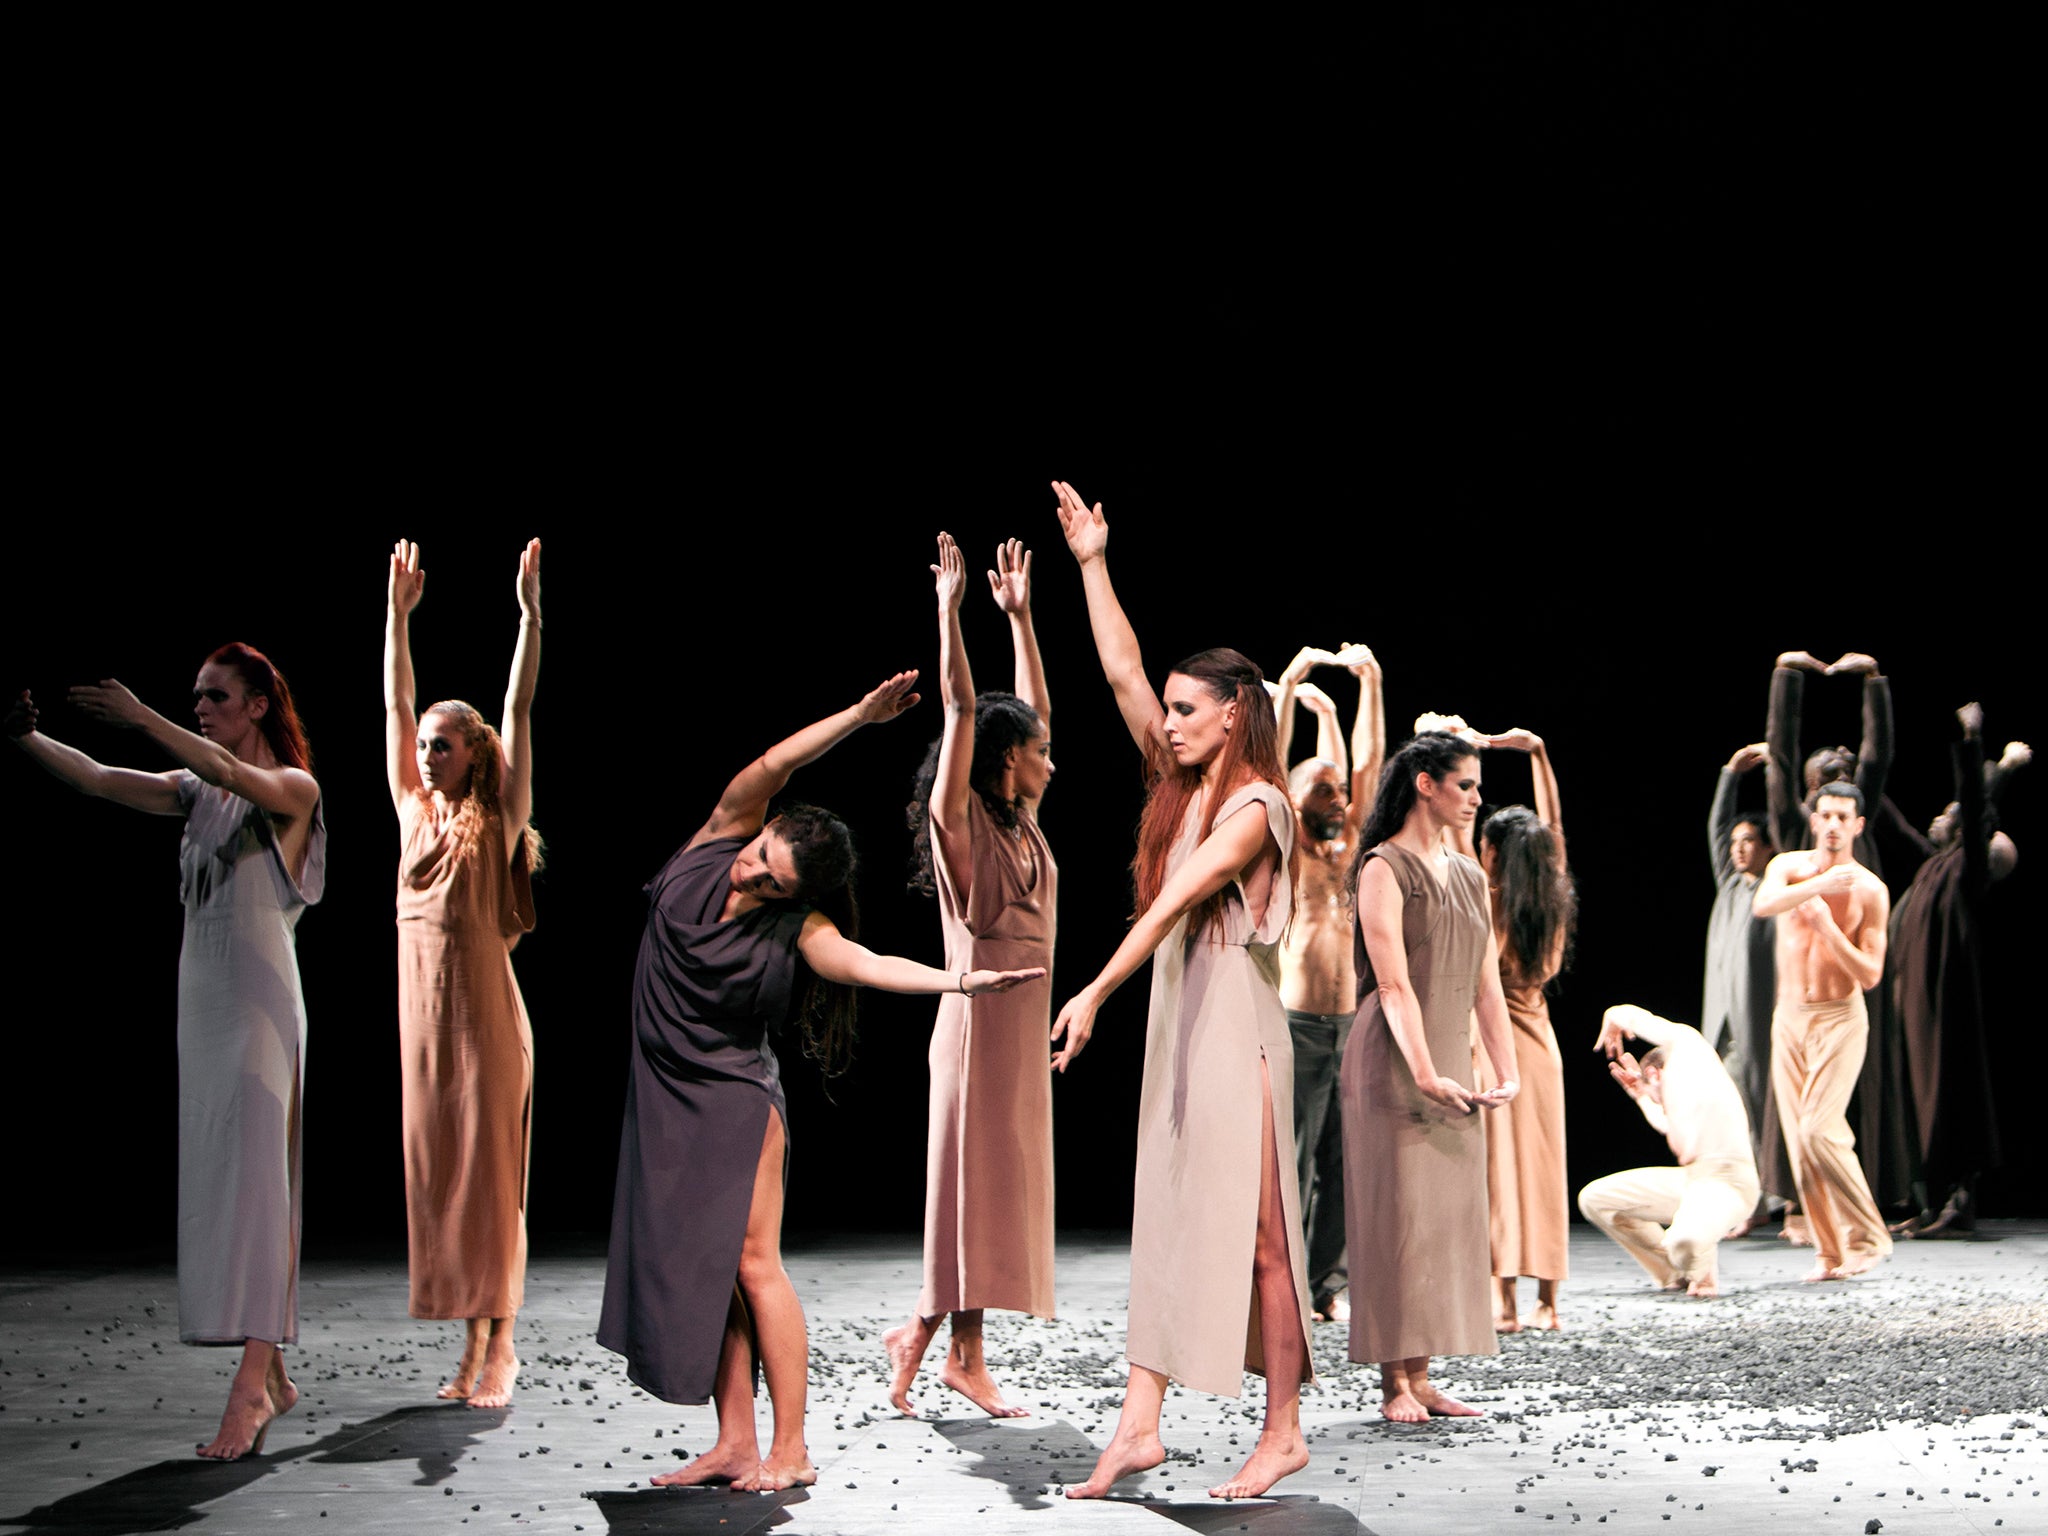 Waltz, a German choreographer based in Berlin, is known for her collaborations across art forms